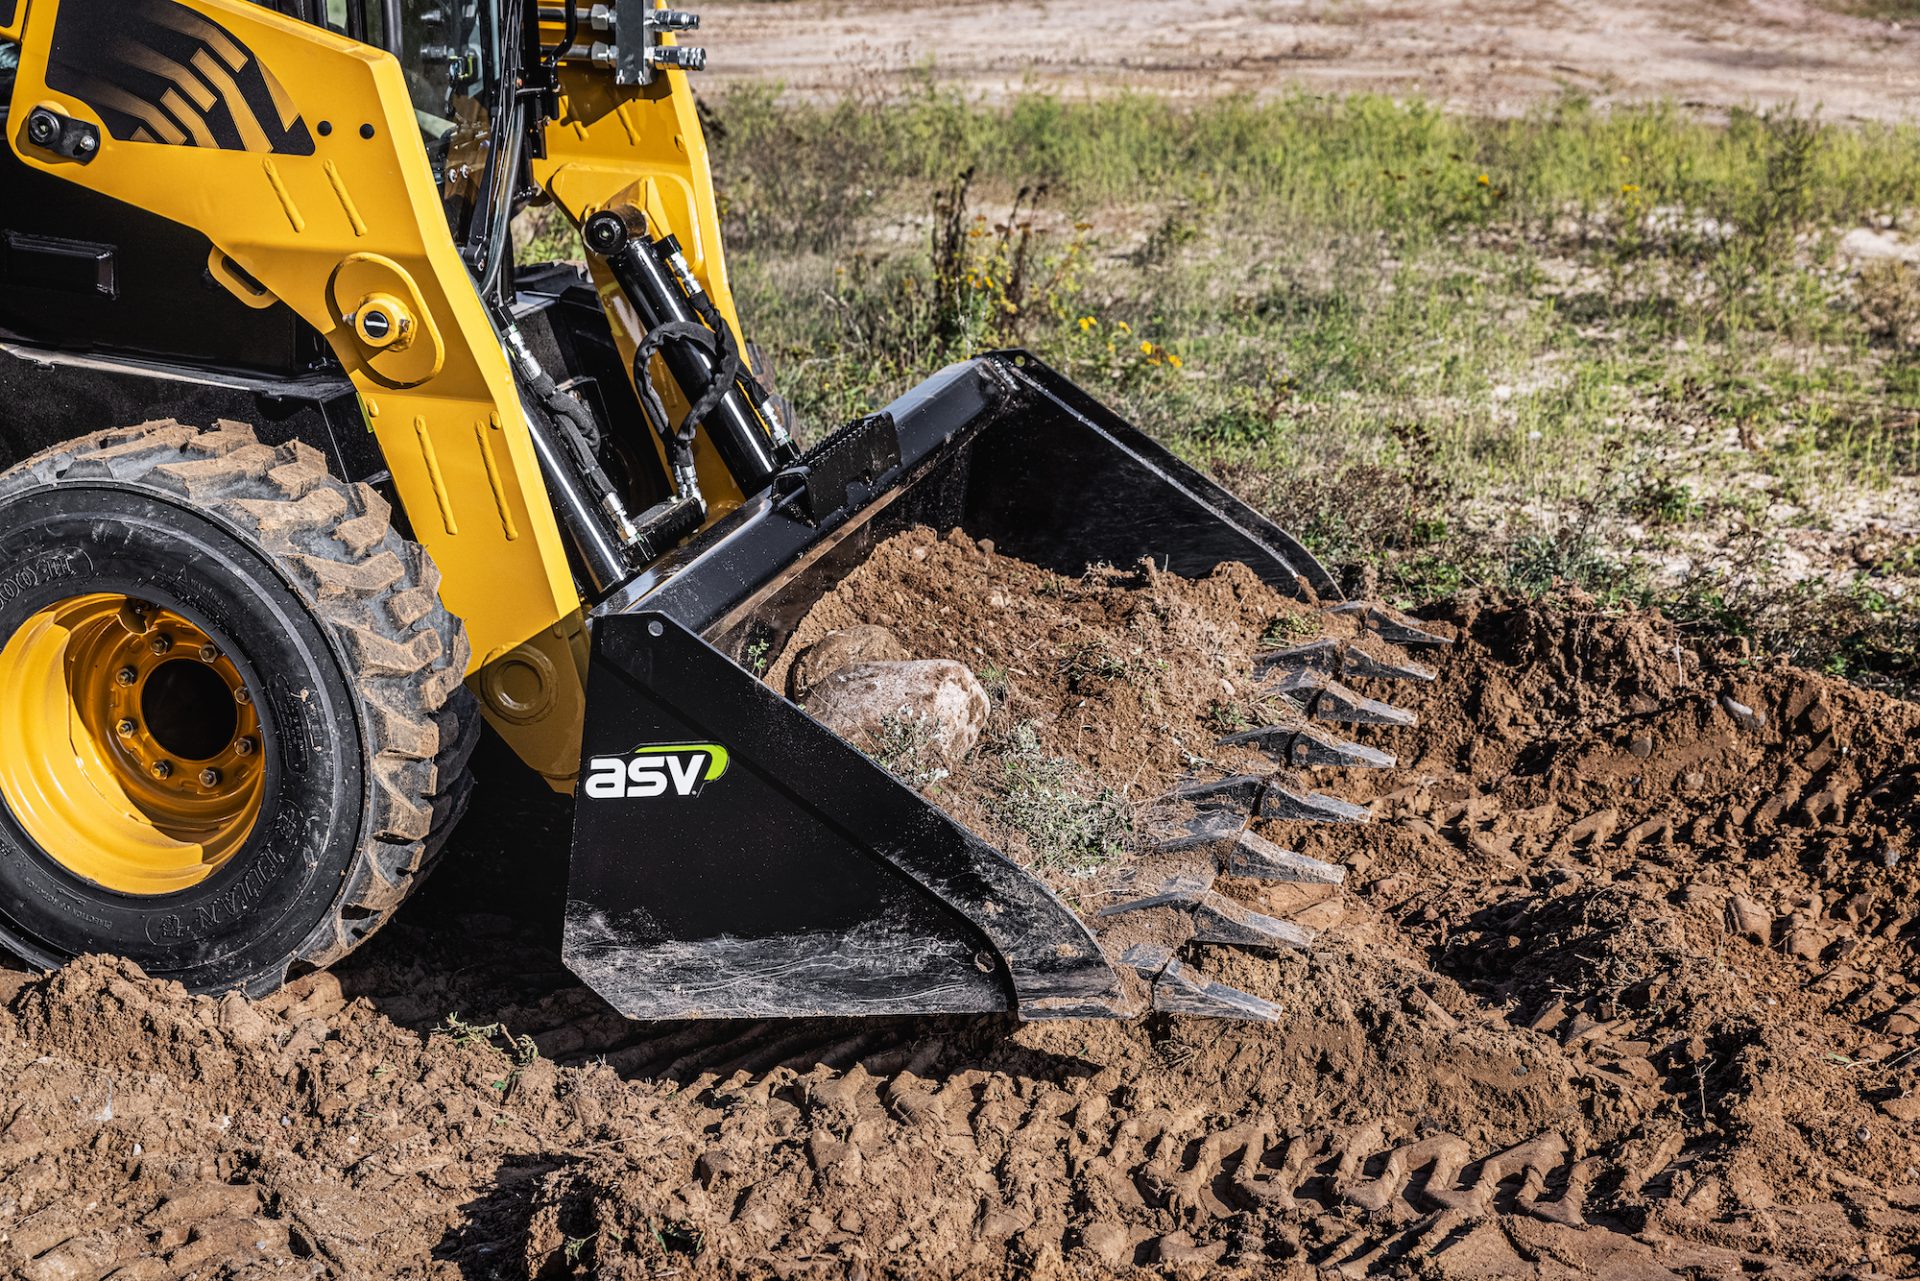 An ASV skid steer with a bucket attachment from the company's new line of attachments.